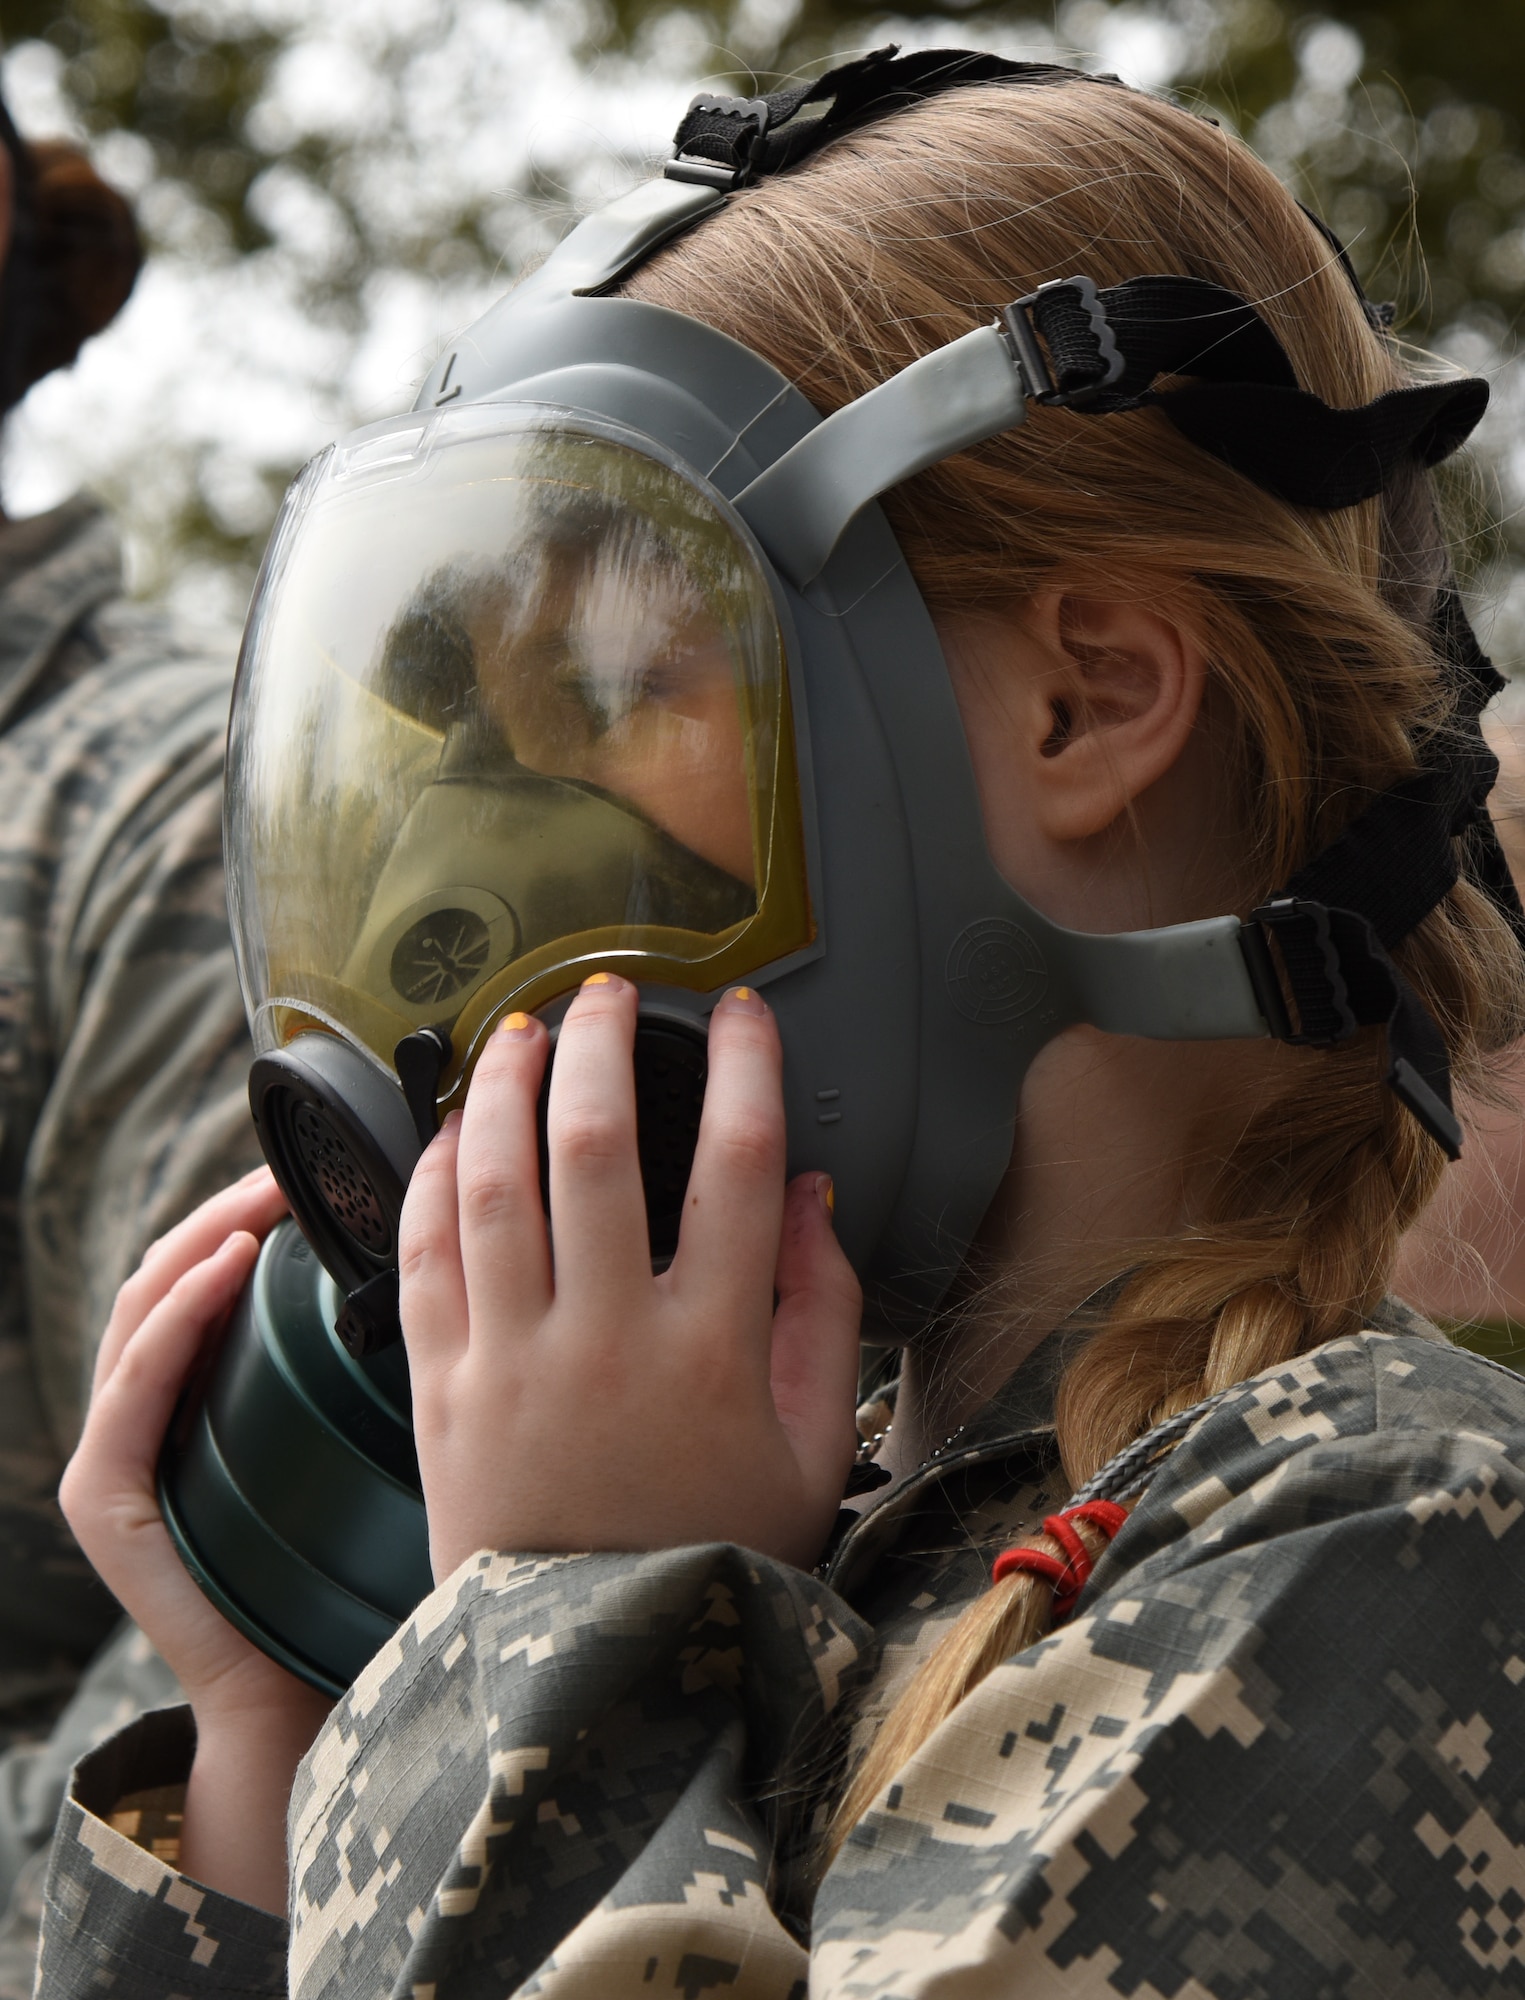 Emily Quigley, daughter of U.S. Air Force Col. Marcia Quigley, 81st Mission Support Group commander, tries on a gas mask during Operation Hero at Keesler Air Force Base, Mississippi, April 6, 2019. The event, hosted by the Airman and Family Readiness Center in recognition of the Month of the Military Child, gave military children a glimpse into the lives of deployed military members. Children received Operation Hero dog tags and t-shirts as they made their way through the mock deployment line as well as the opportunity to experience medical triage demonstrations, gas mask training and have their faces painted. (U.S. Air Force photo by Kemberly Groue)